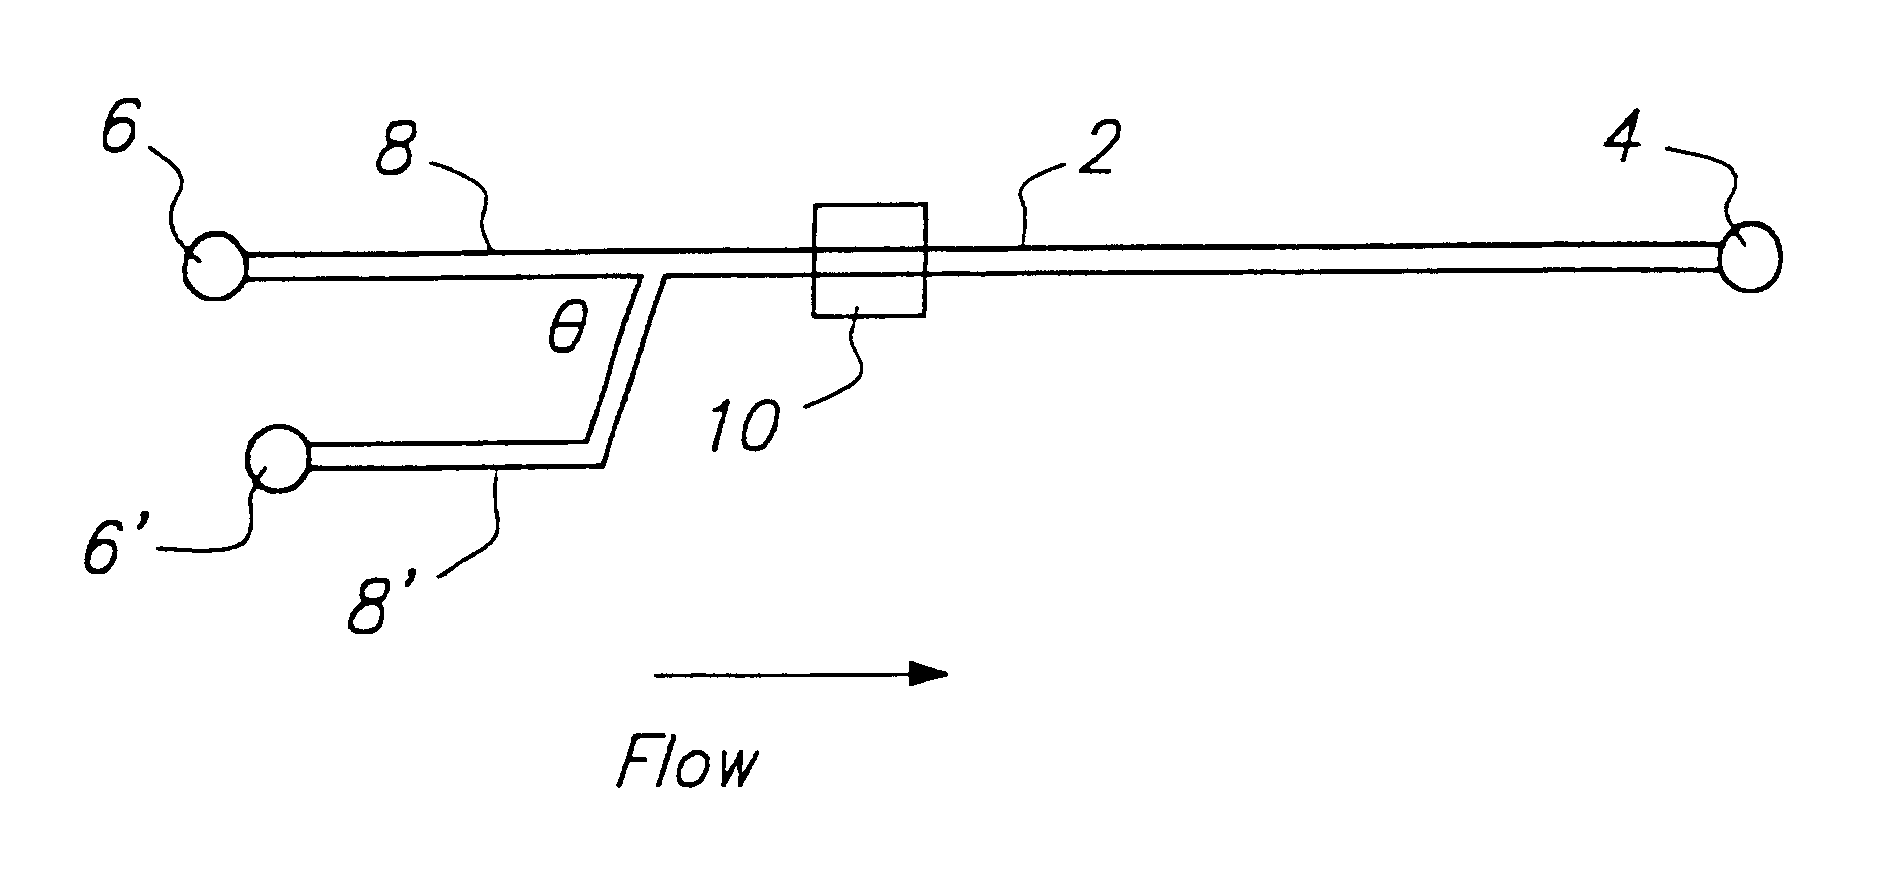 Microfluidic system and methods of use